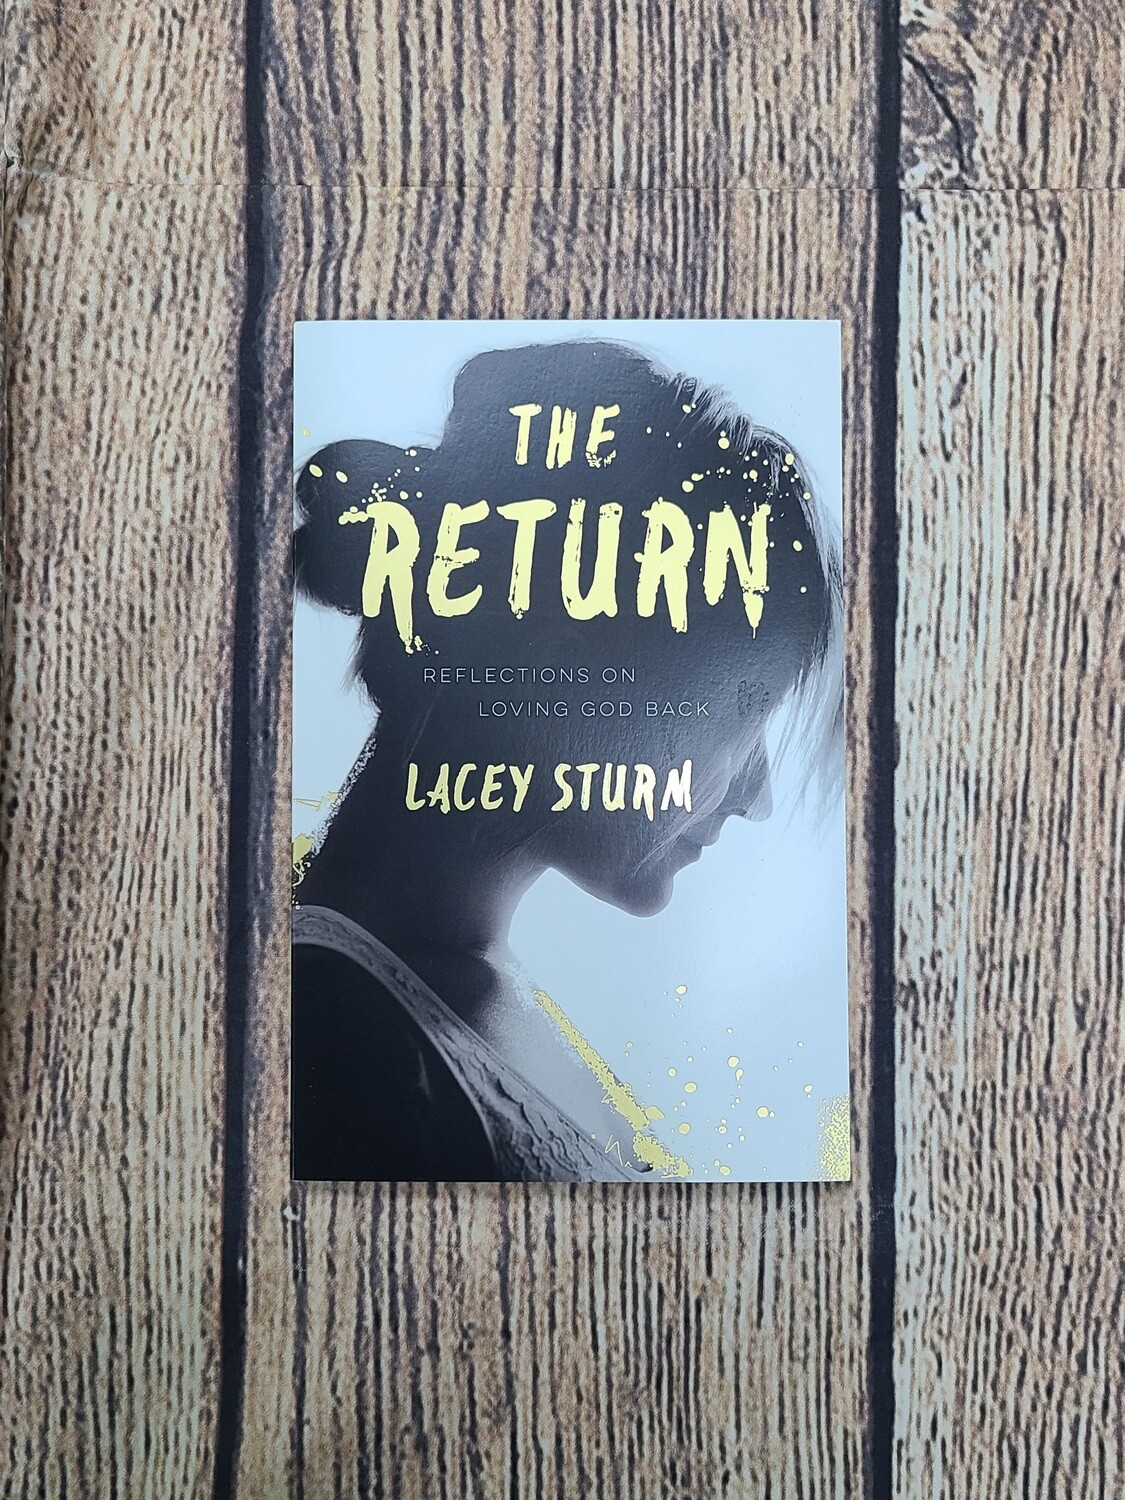 The Return: Reflections on Loving God Back by Lacey Sturm